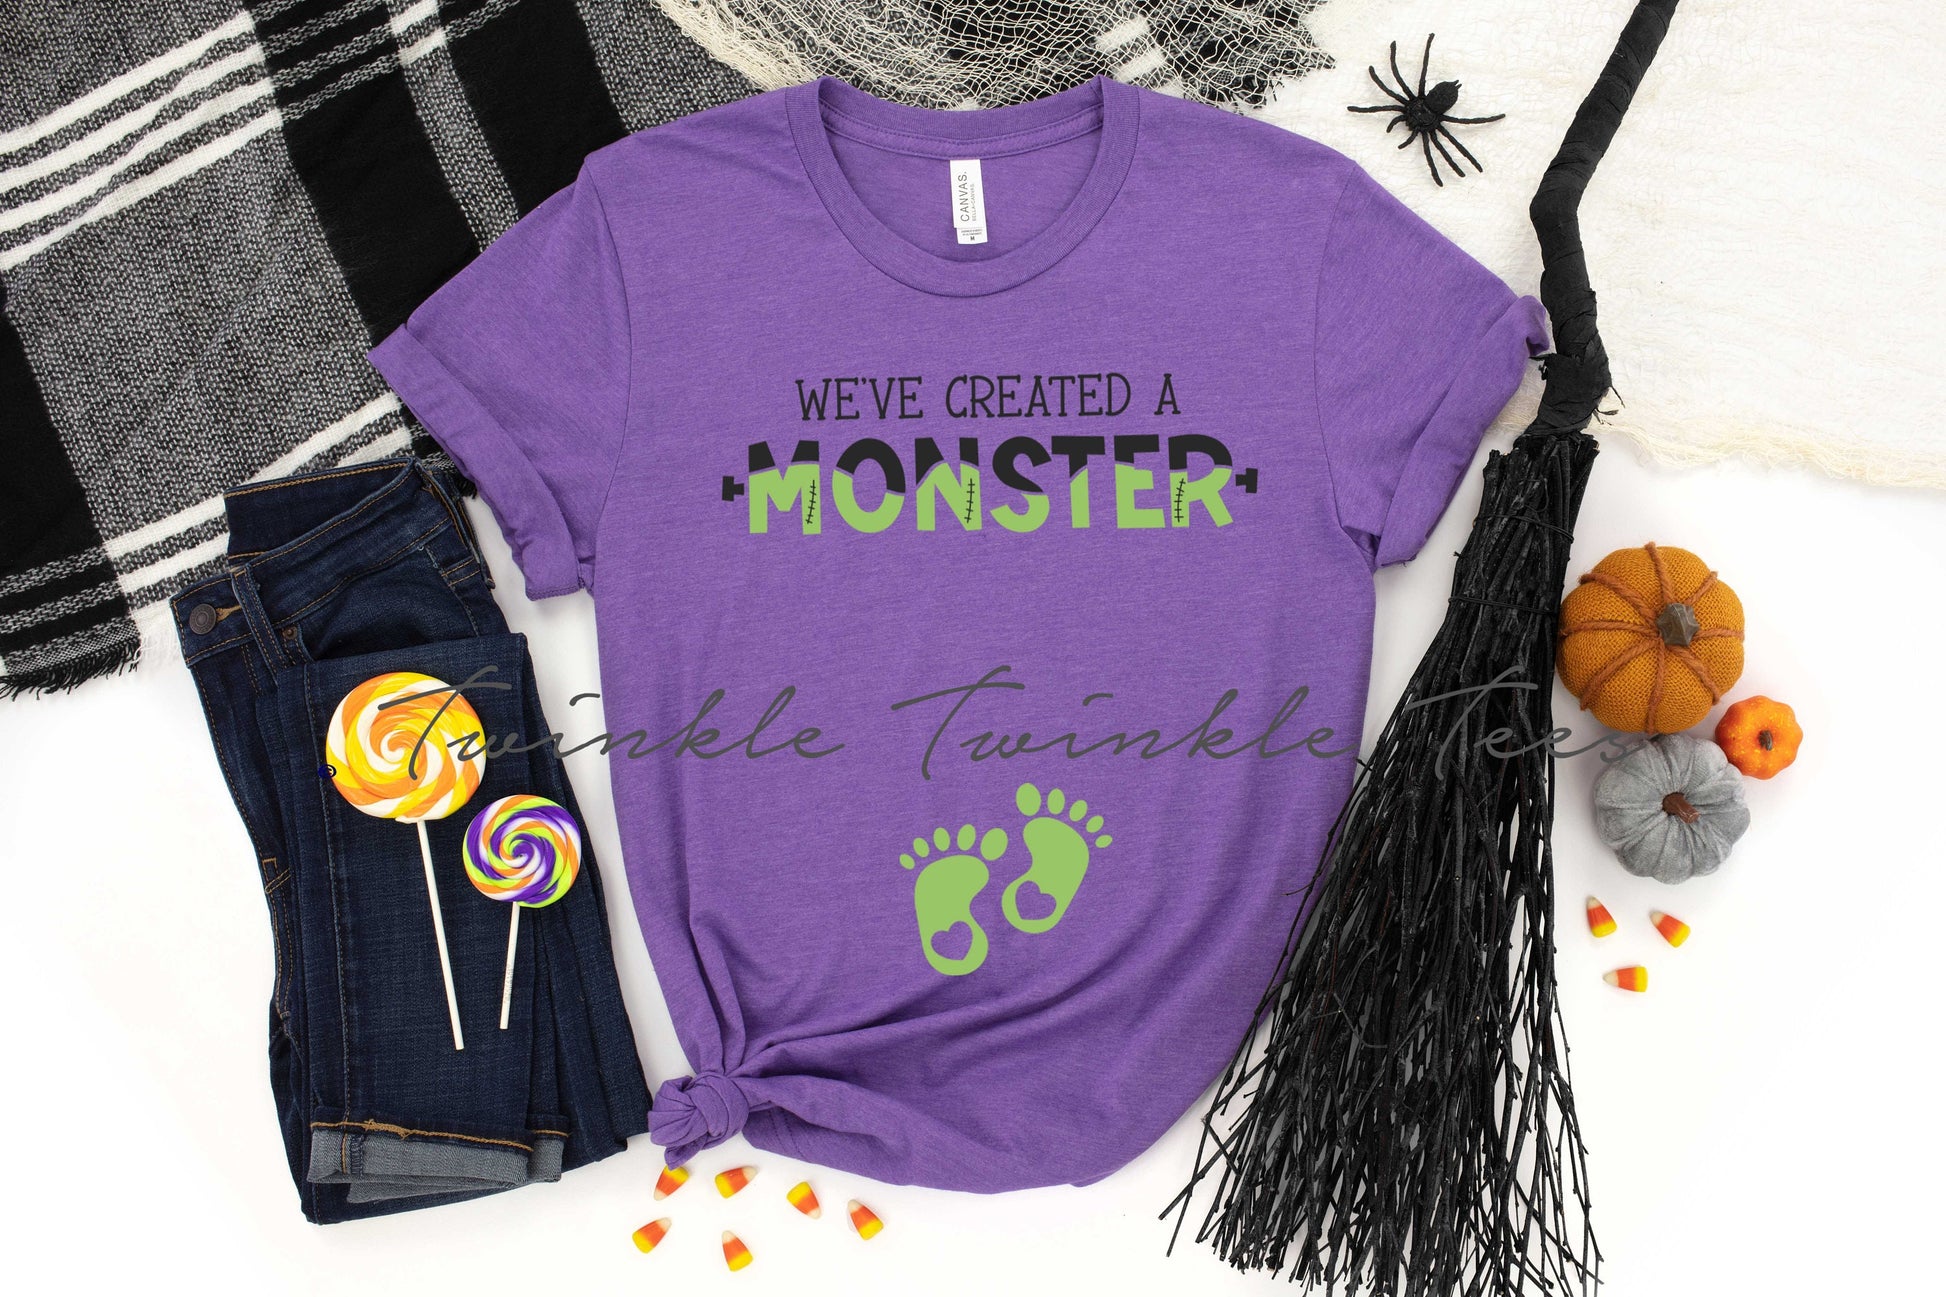 We've Created a Monster Pregnancy Announcement Halloween t-shirt - halloween pregnancy shirt - halloween t-shirt - halloween maternity